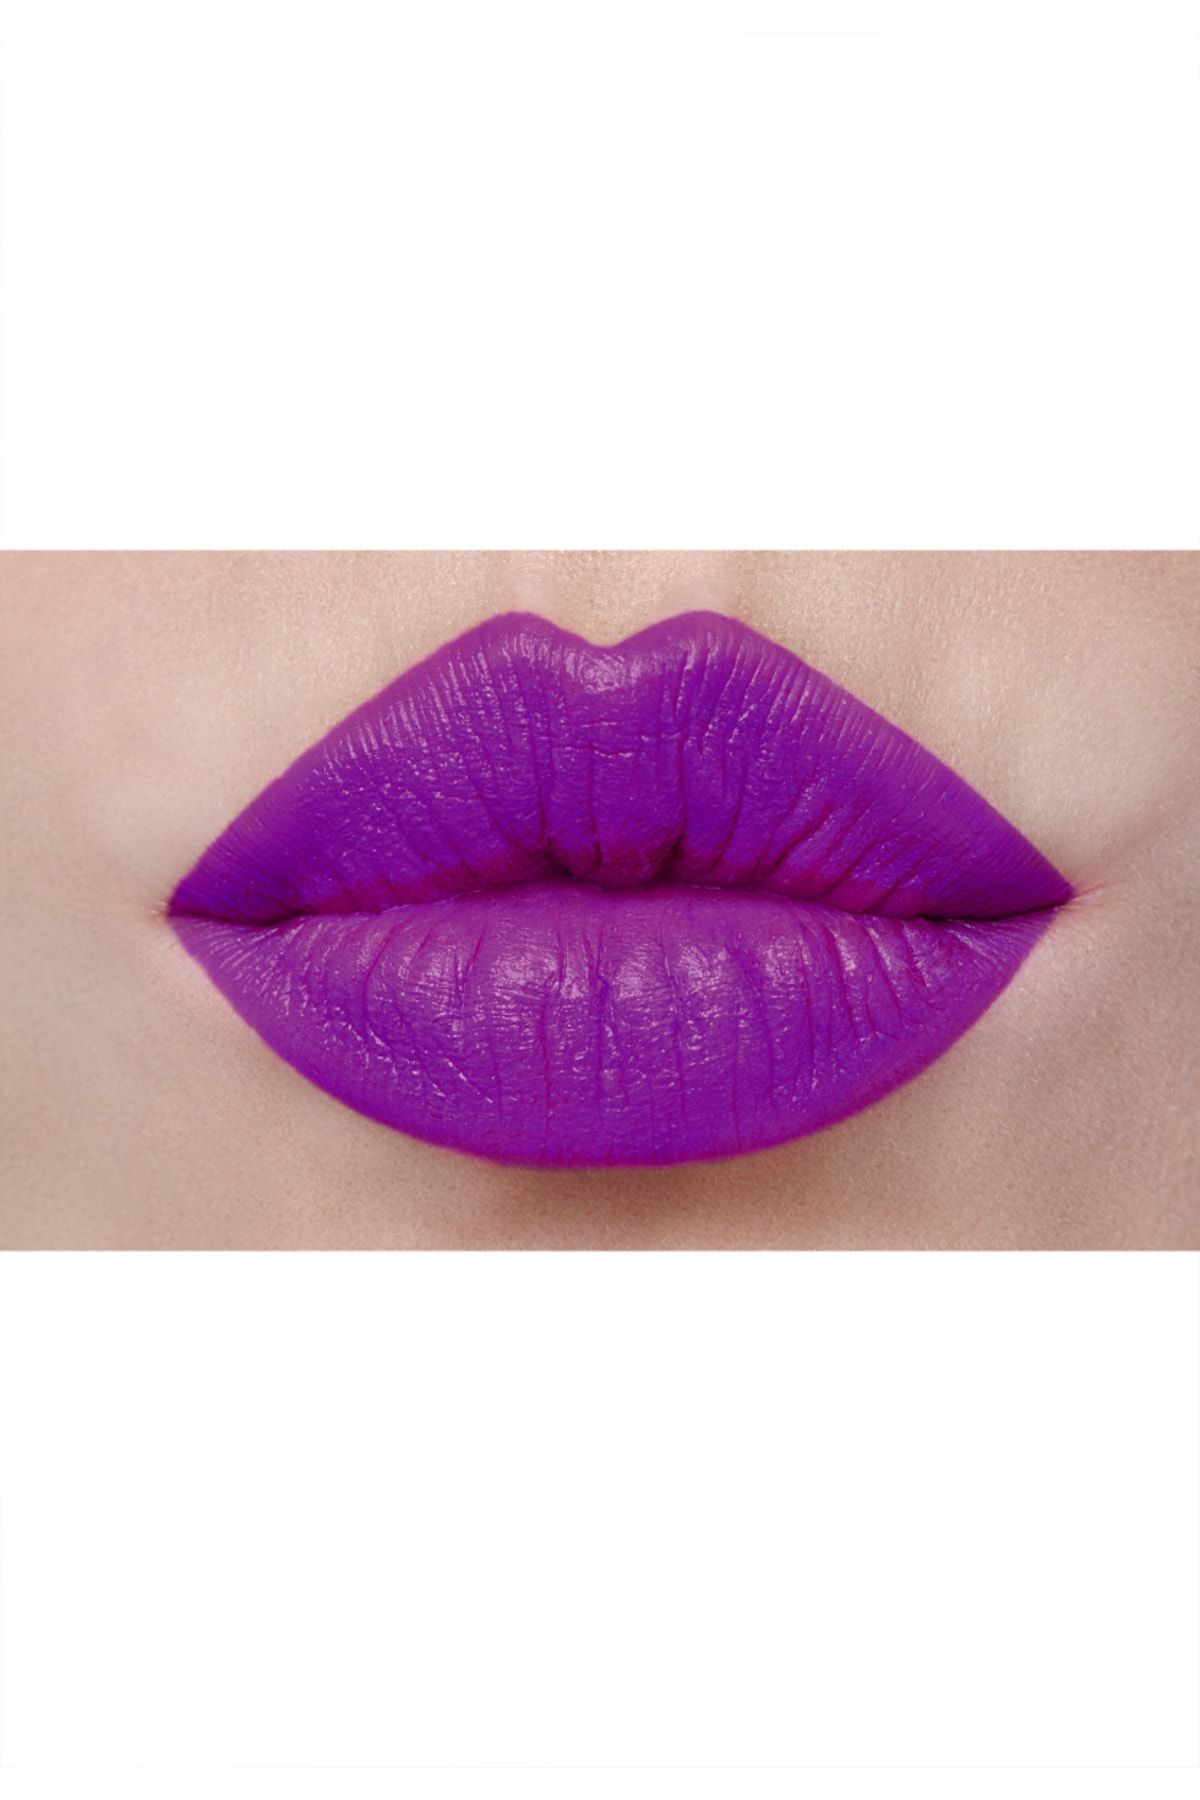 Faberlic Hd Color Lipstick, Shade "blueberry Pie" - 4.0 Gr.